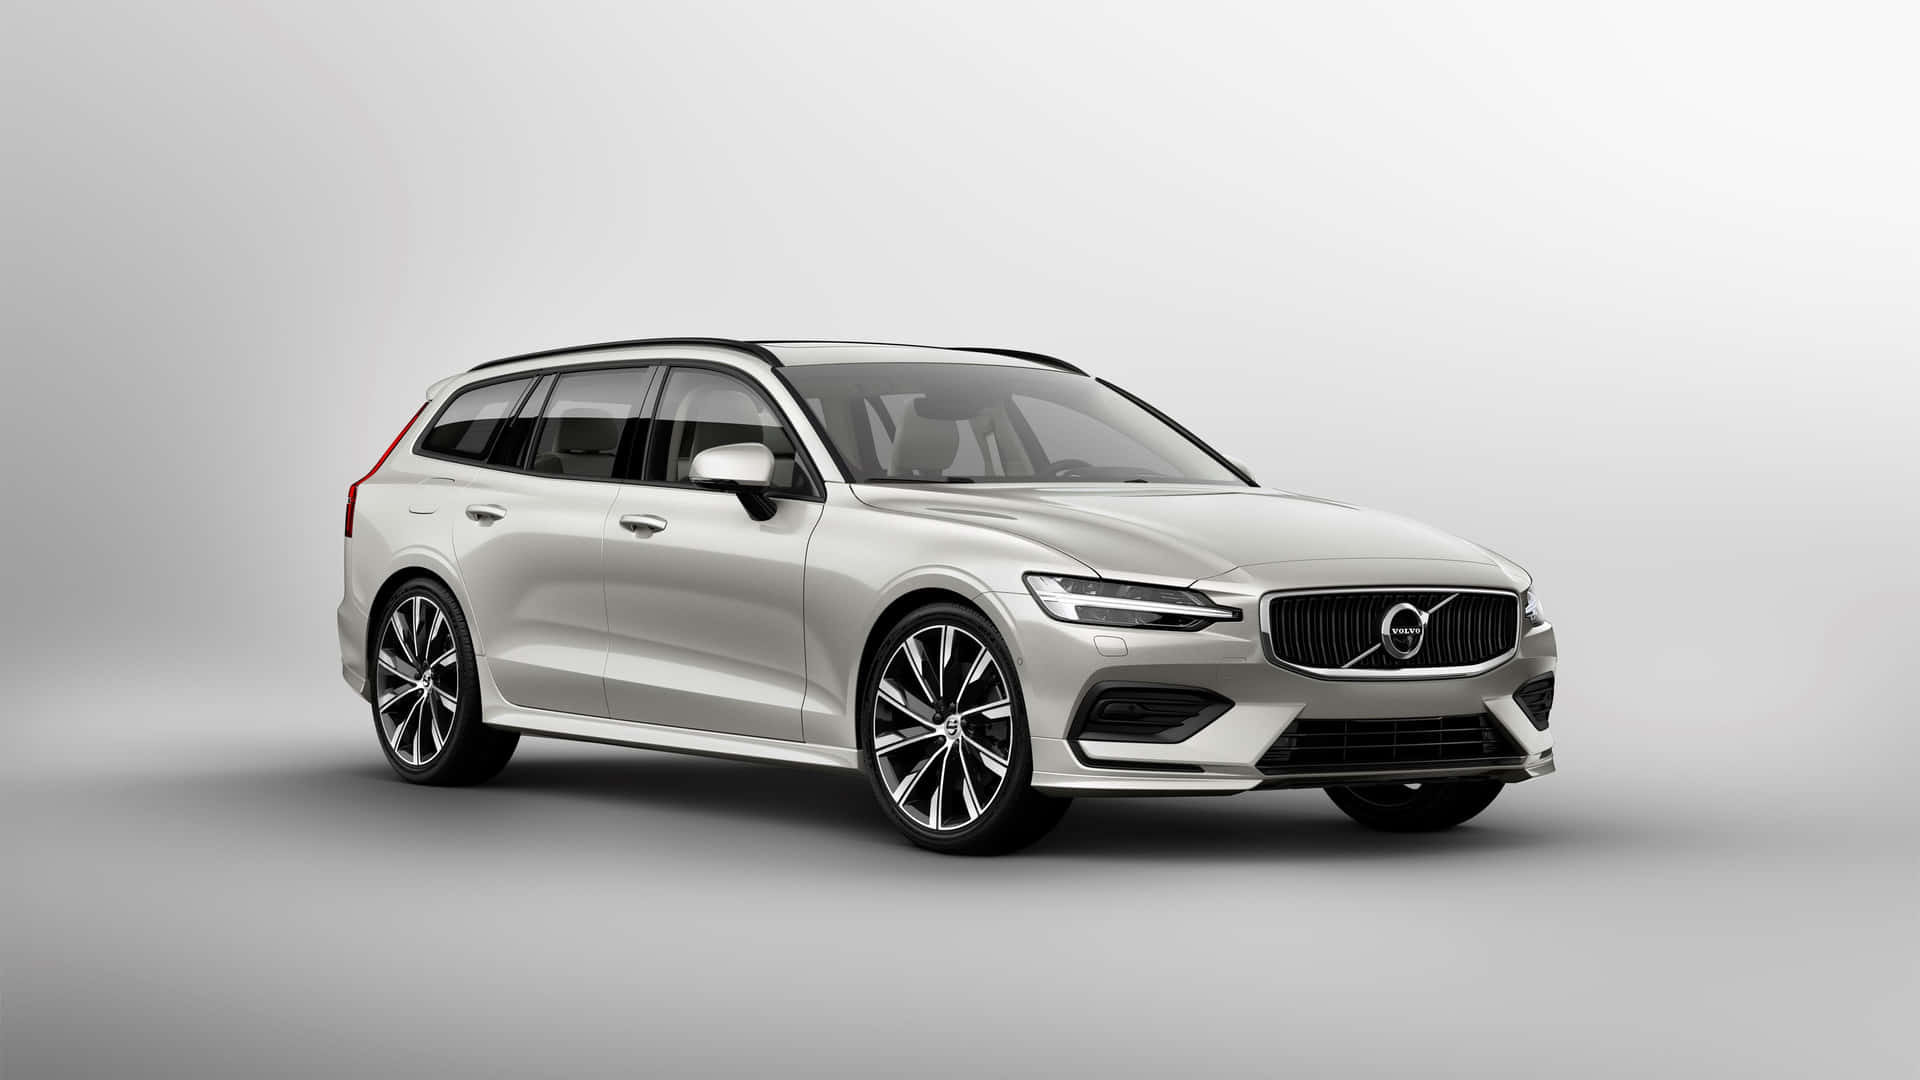 Immaculate Volvo V60 In Natural Scenery Wallpaper